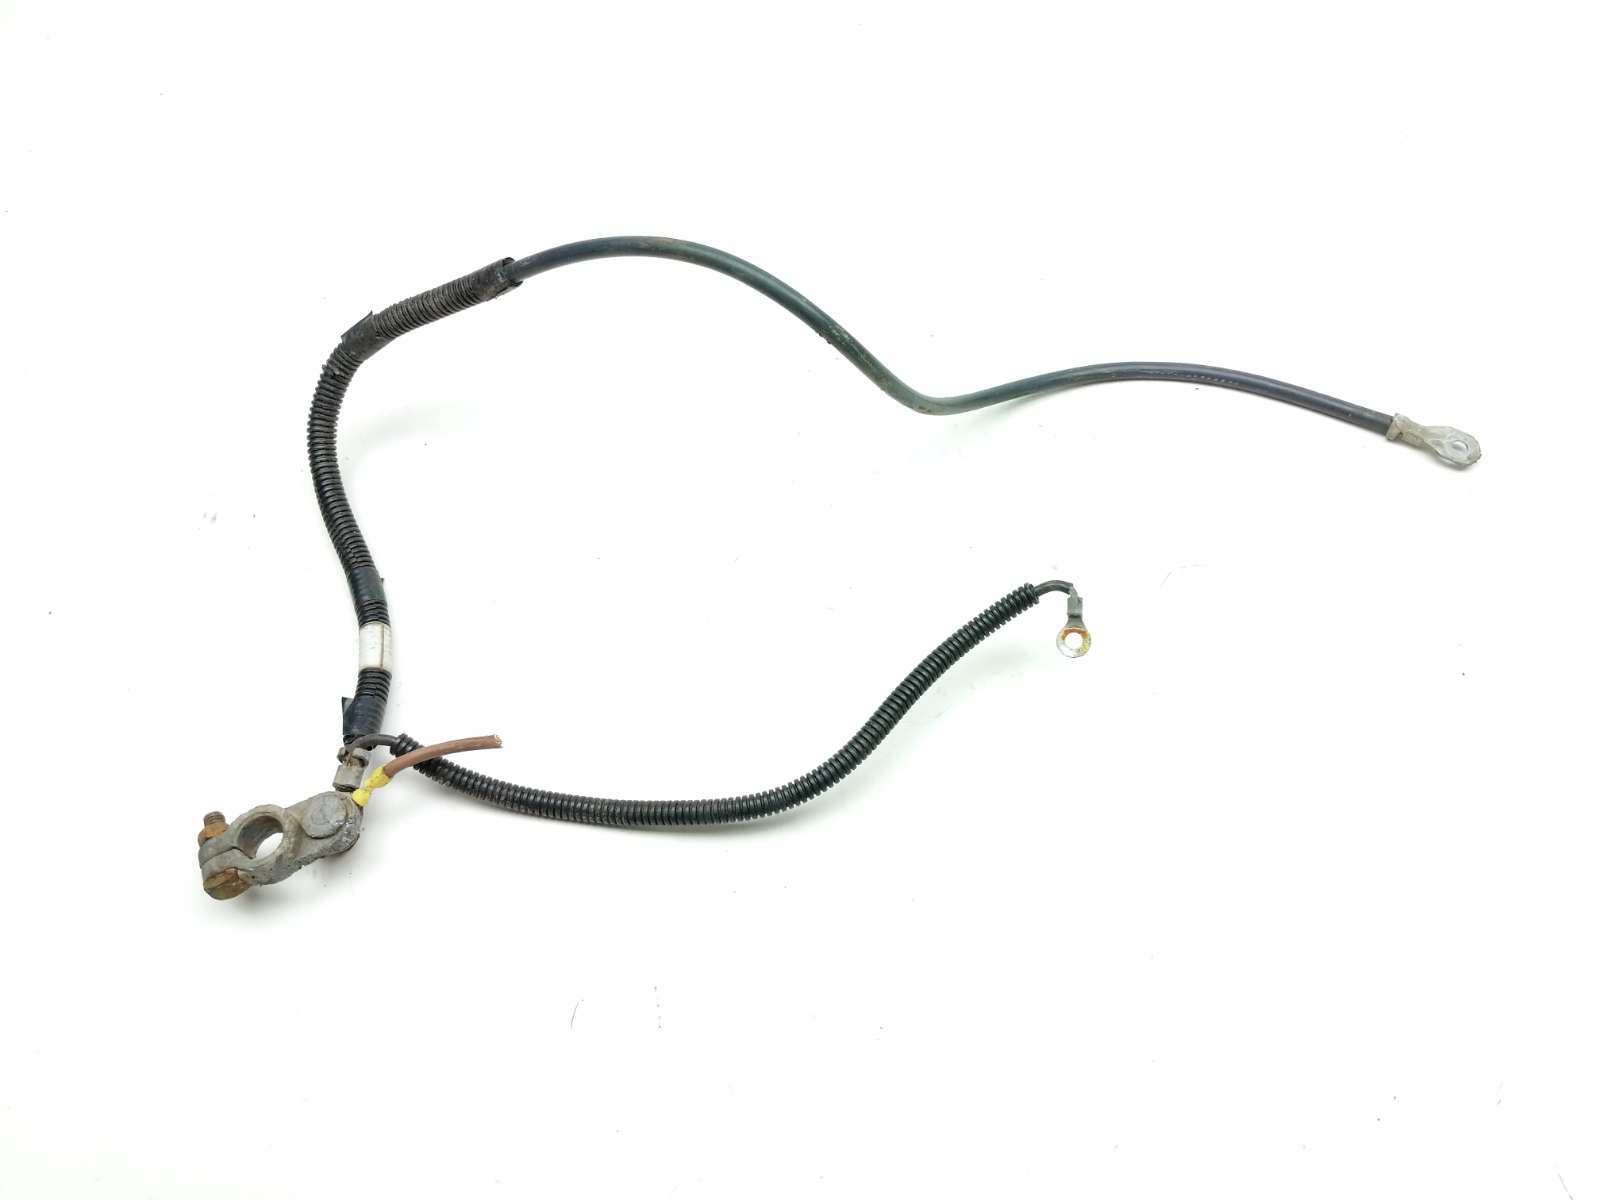 06 John Deere HPX Gator 4x4 Battery Wire Cable Lines